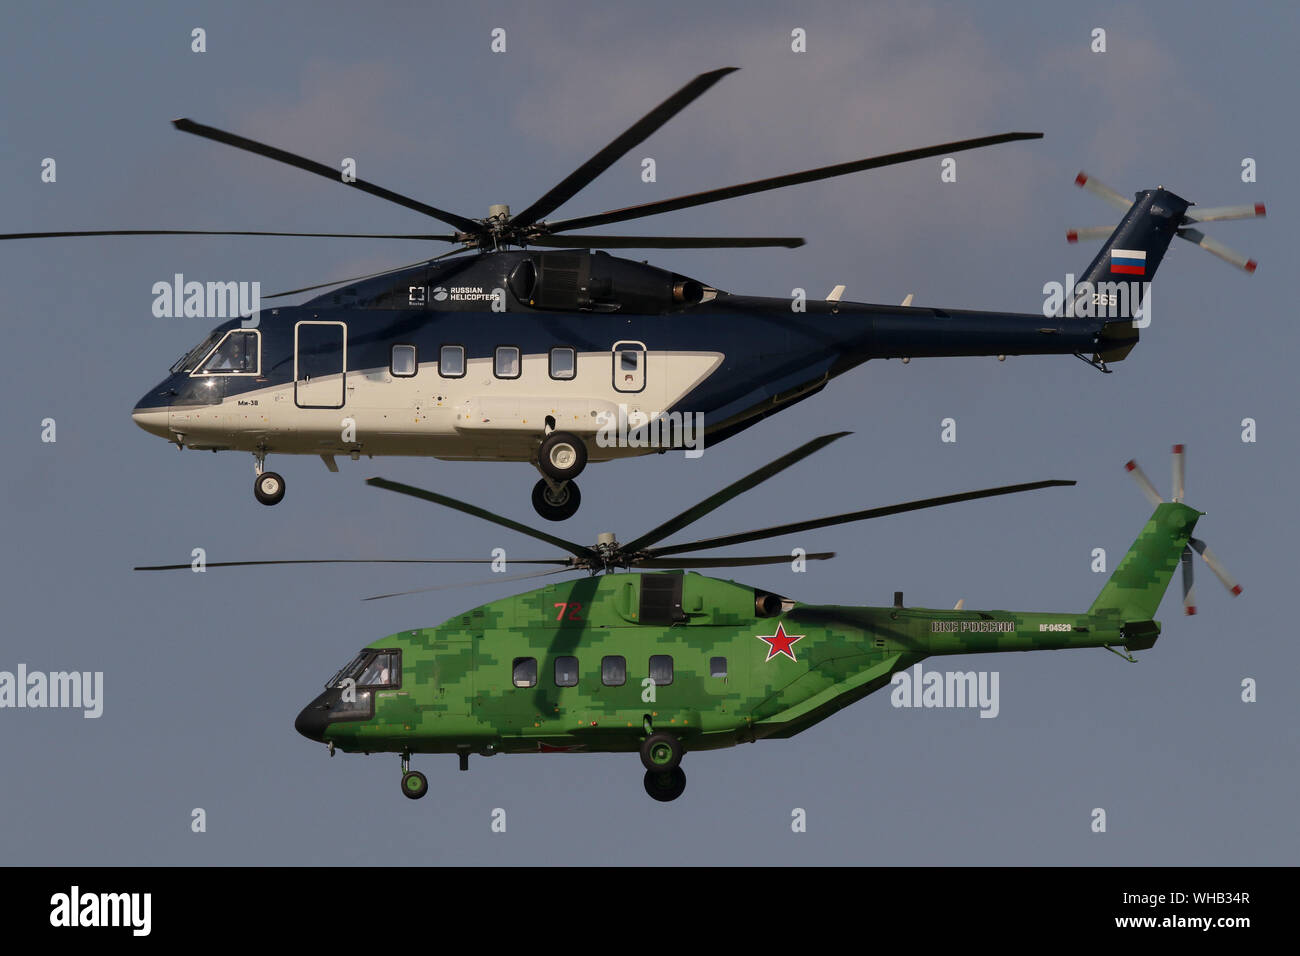 Two Mil Mi-38 helicopters - VIP and Transport version - perform the flight display on the final day of MAKS-2019 Moscow International Airshow near Zhukovsky, South-East of Moscow. Stock Photo